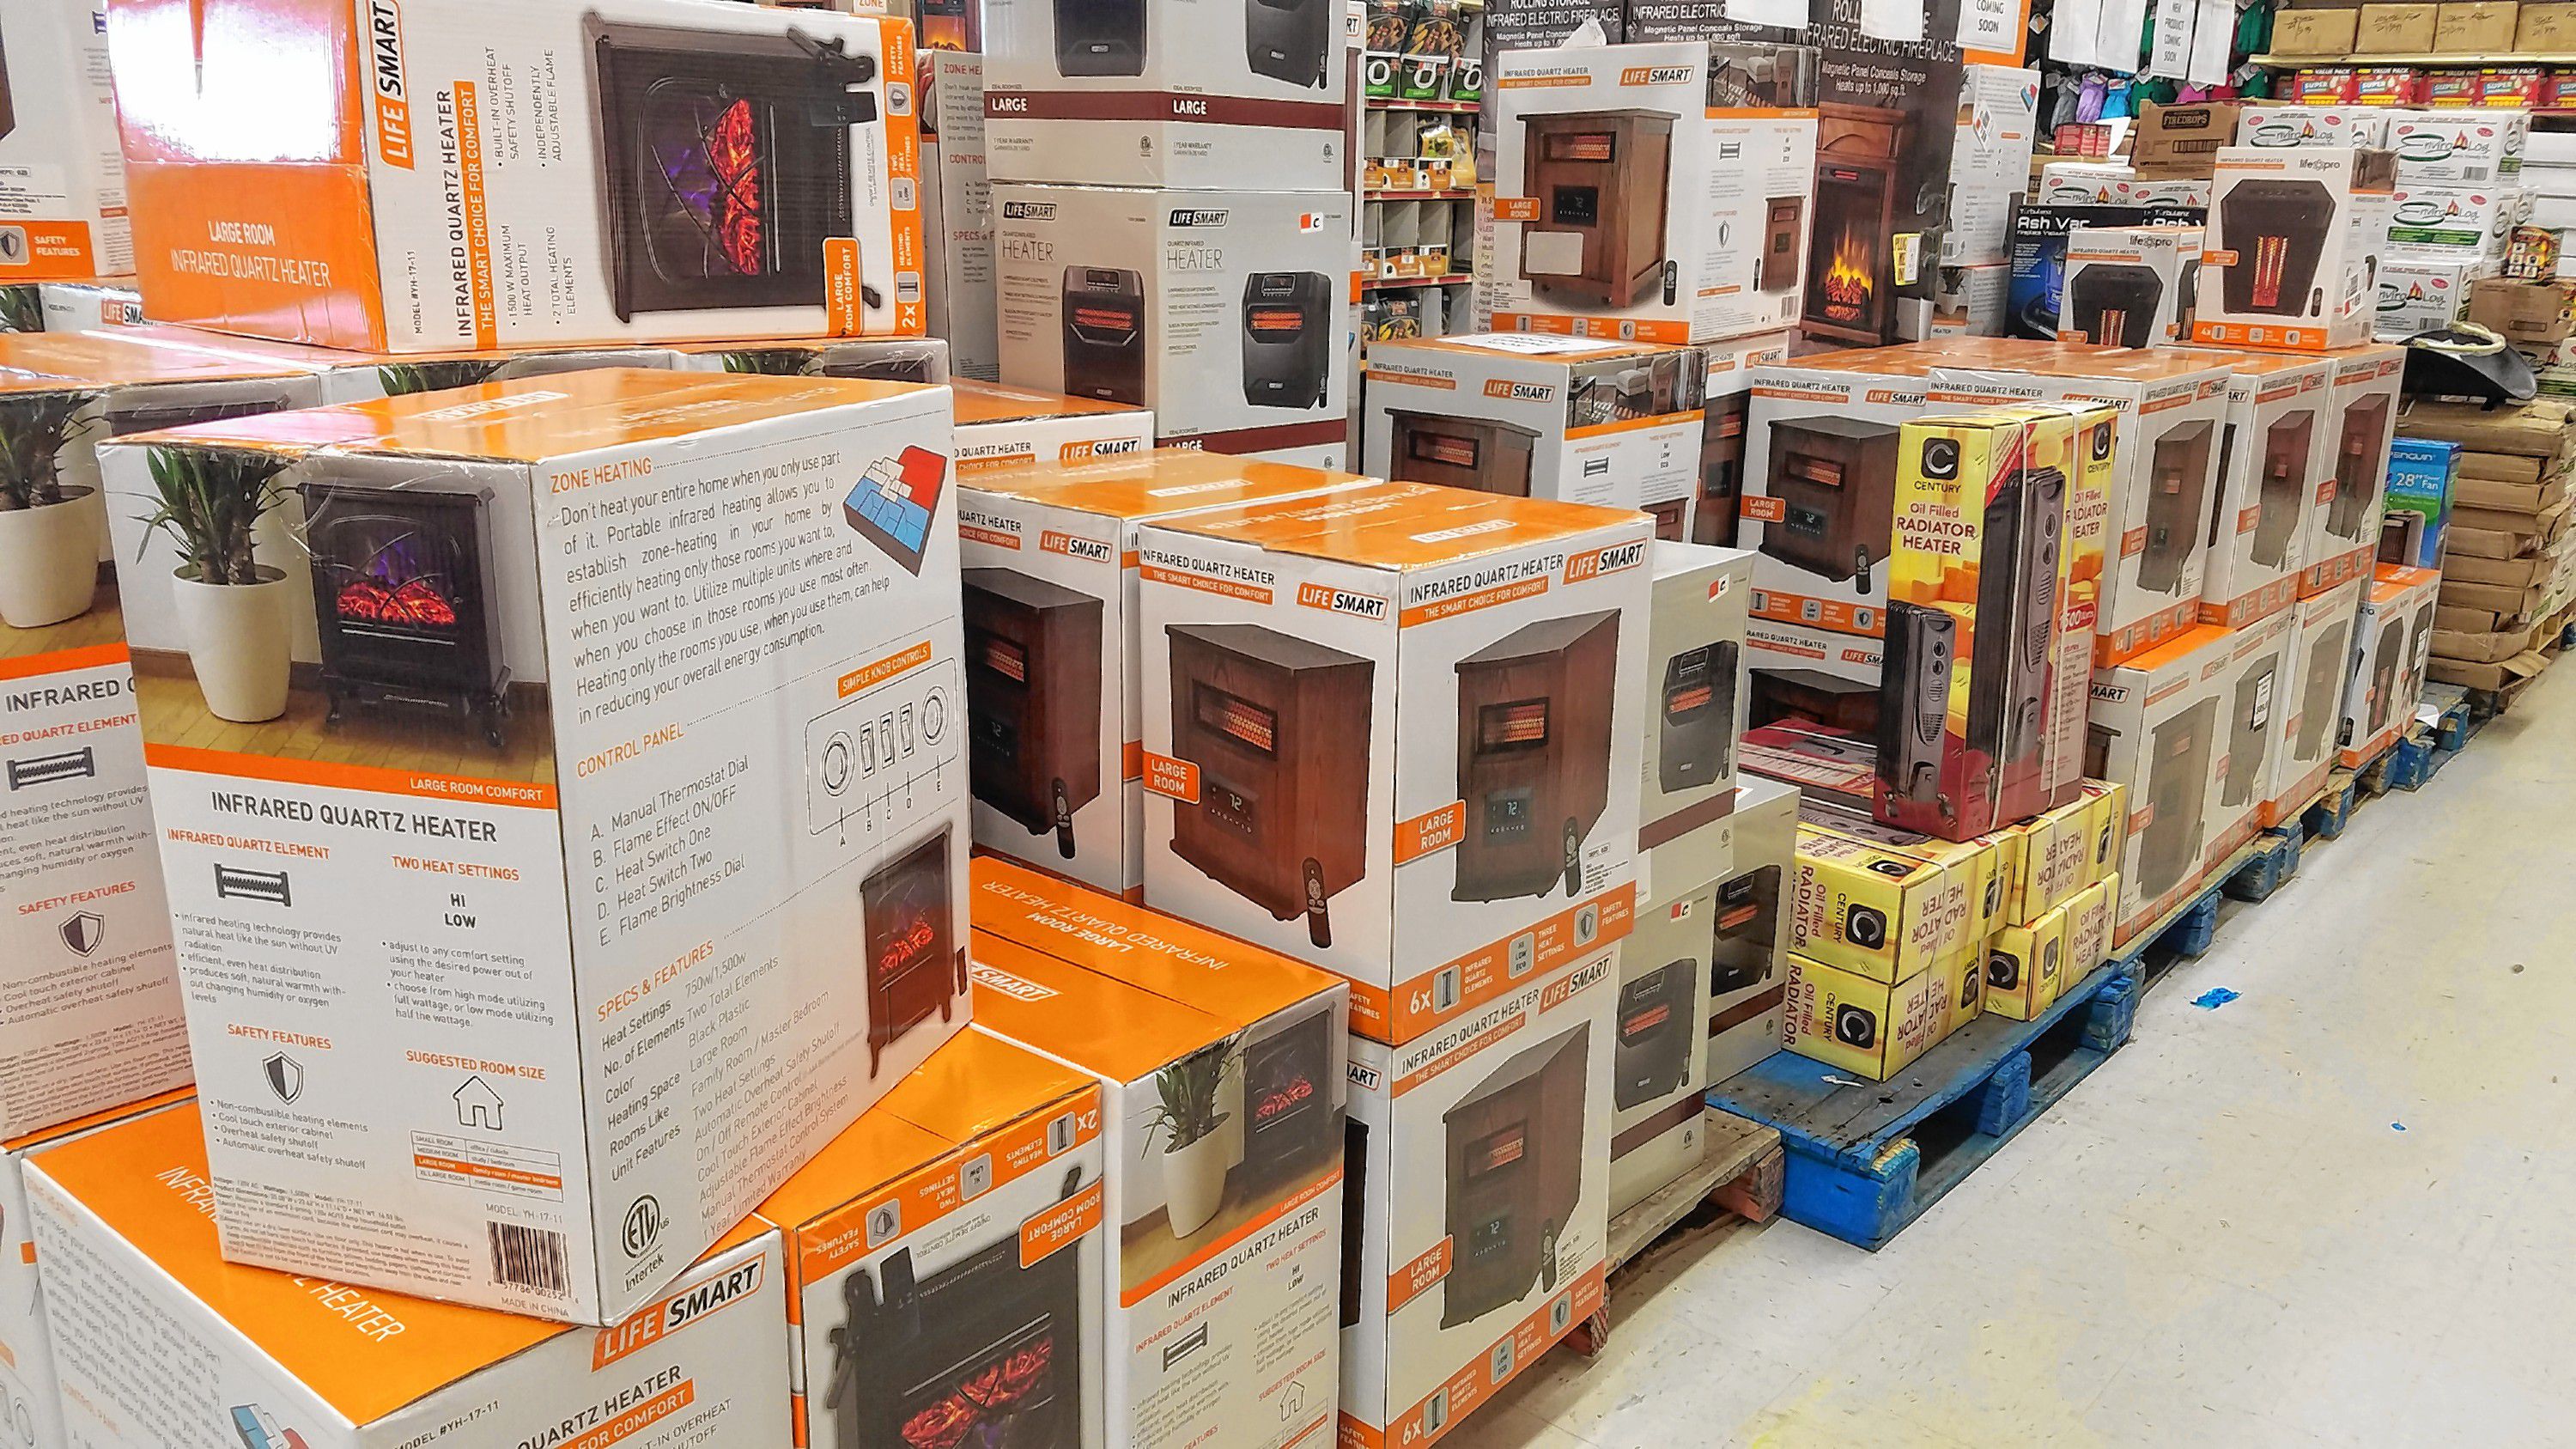 Got a nagging draft in your house? Solve that quick with a large-room space heater, of which the Job Lot has dozens in stock in assorted sizes and styles. JON BODELL / Insider staff